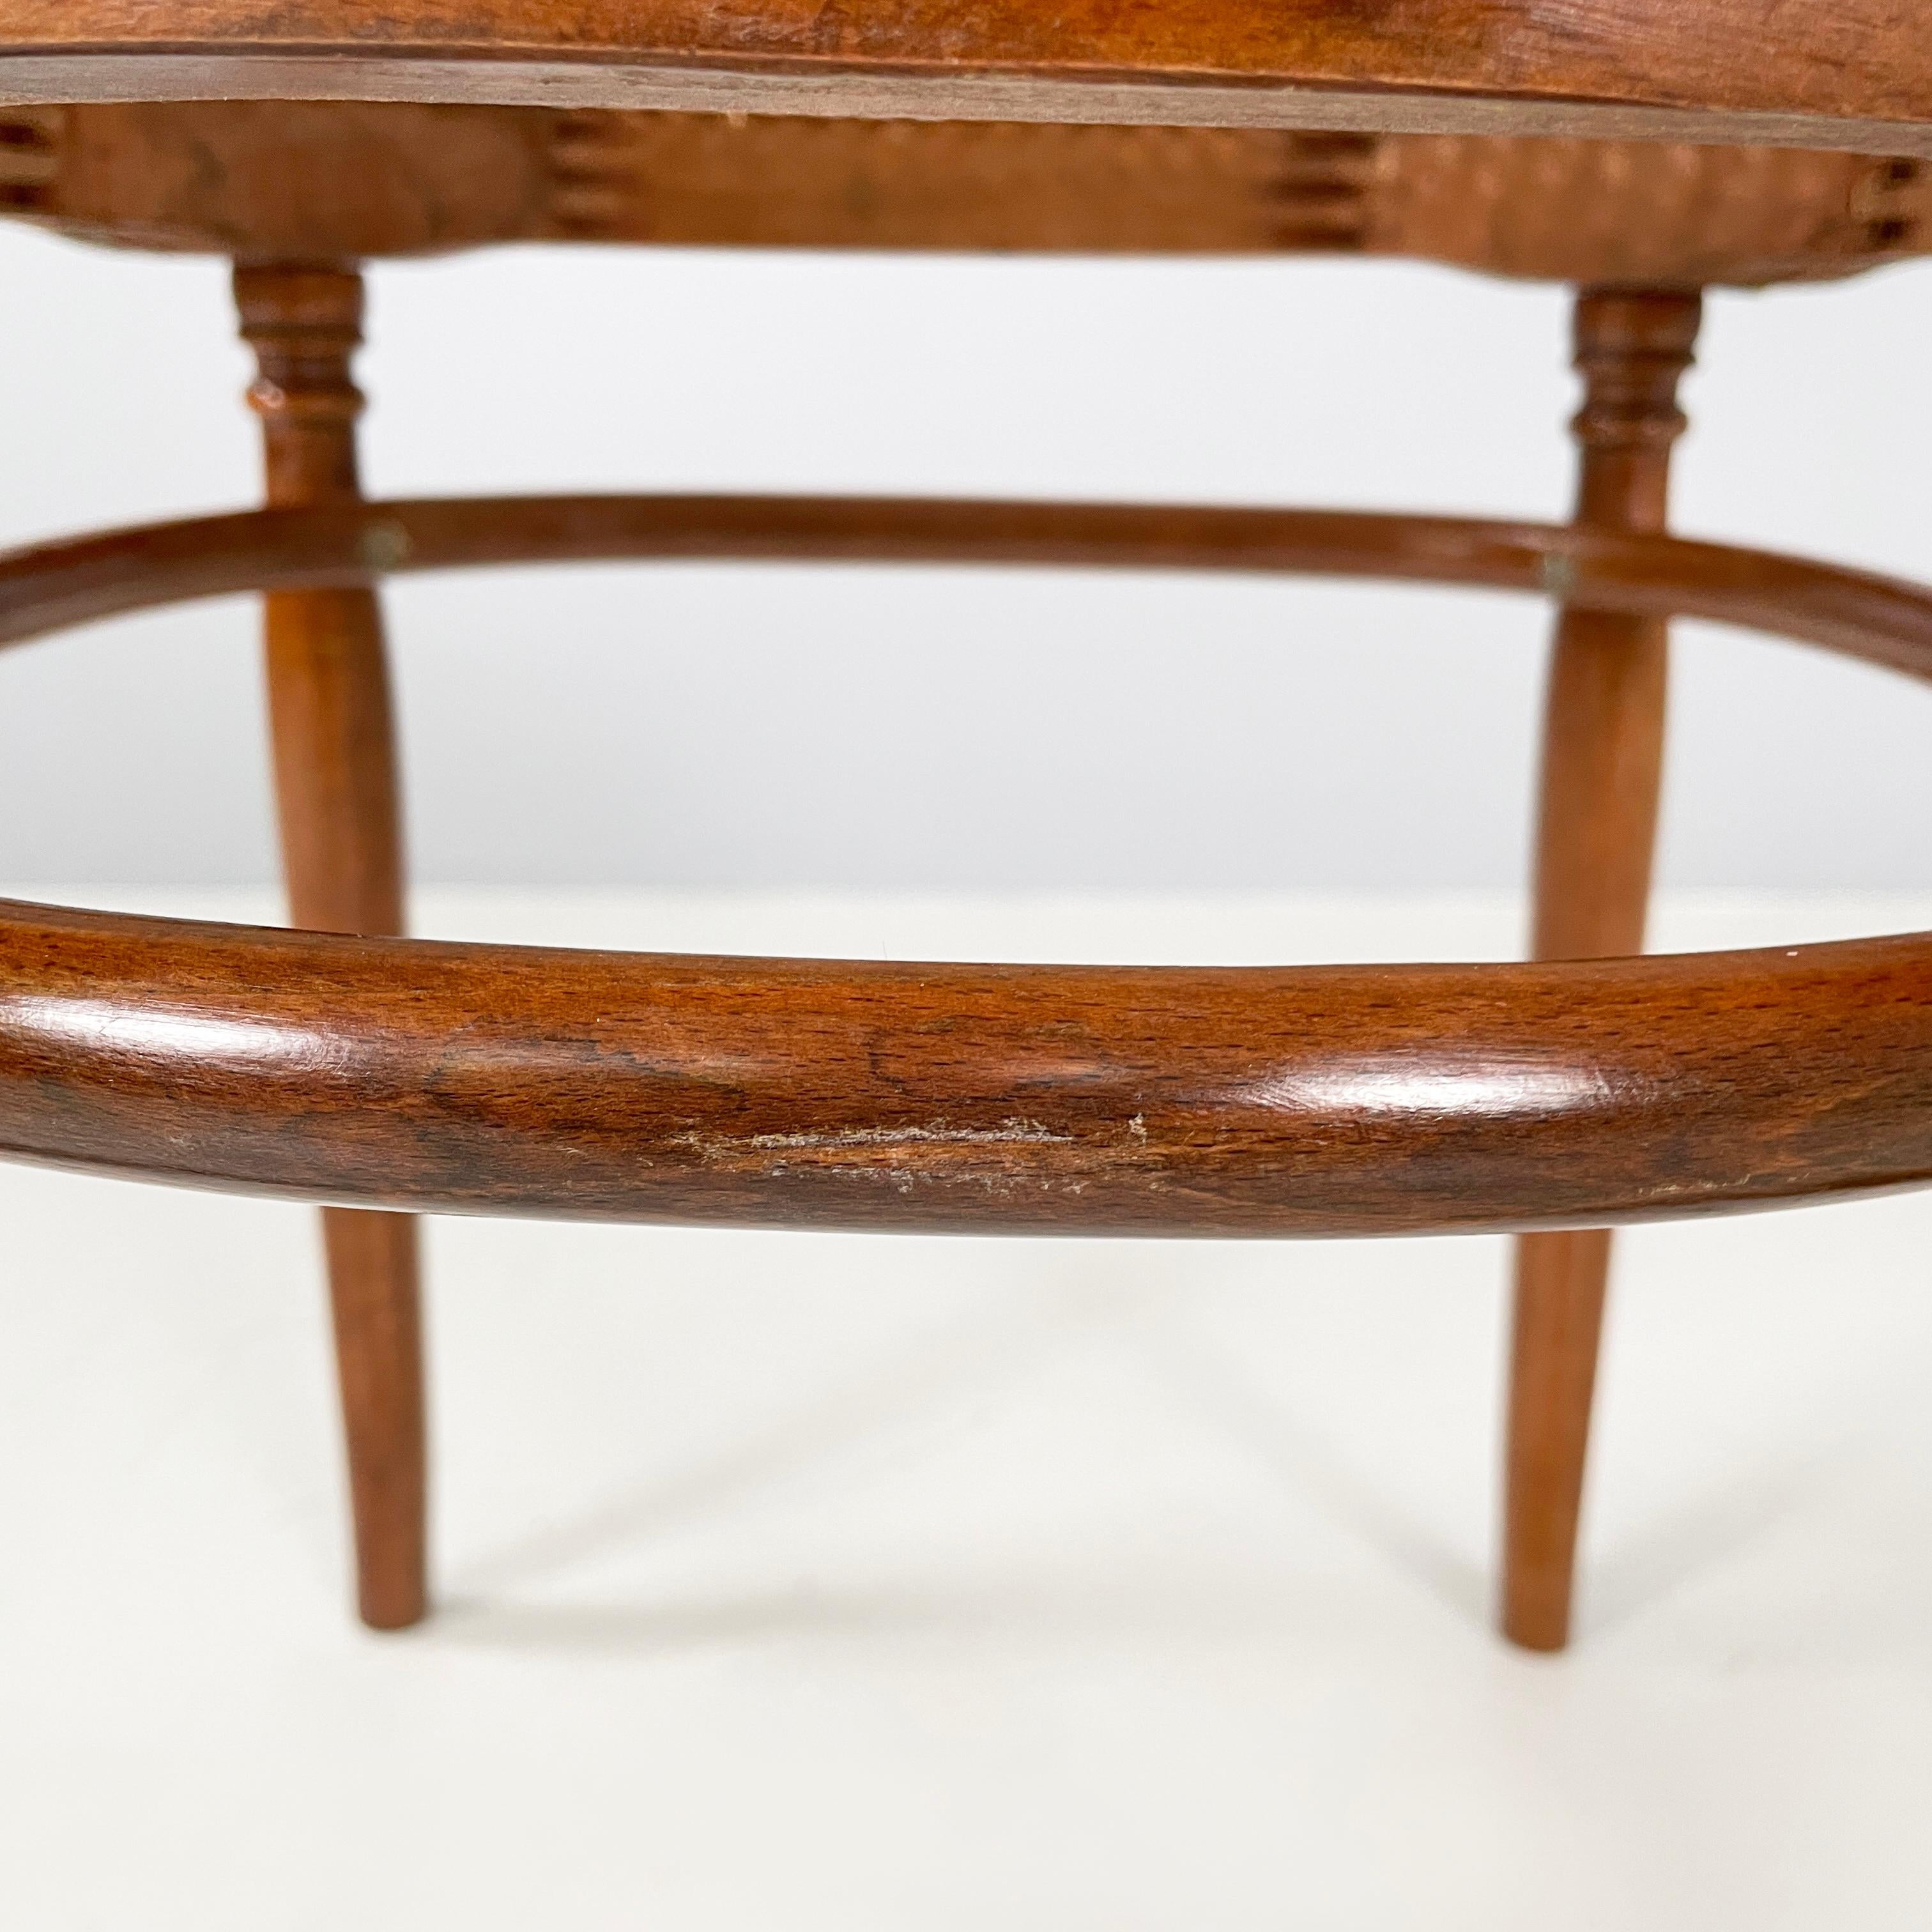 Italian Chair in straw and wood, 1900-1950s For Sale 10